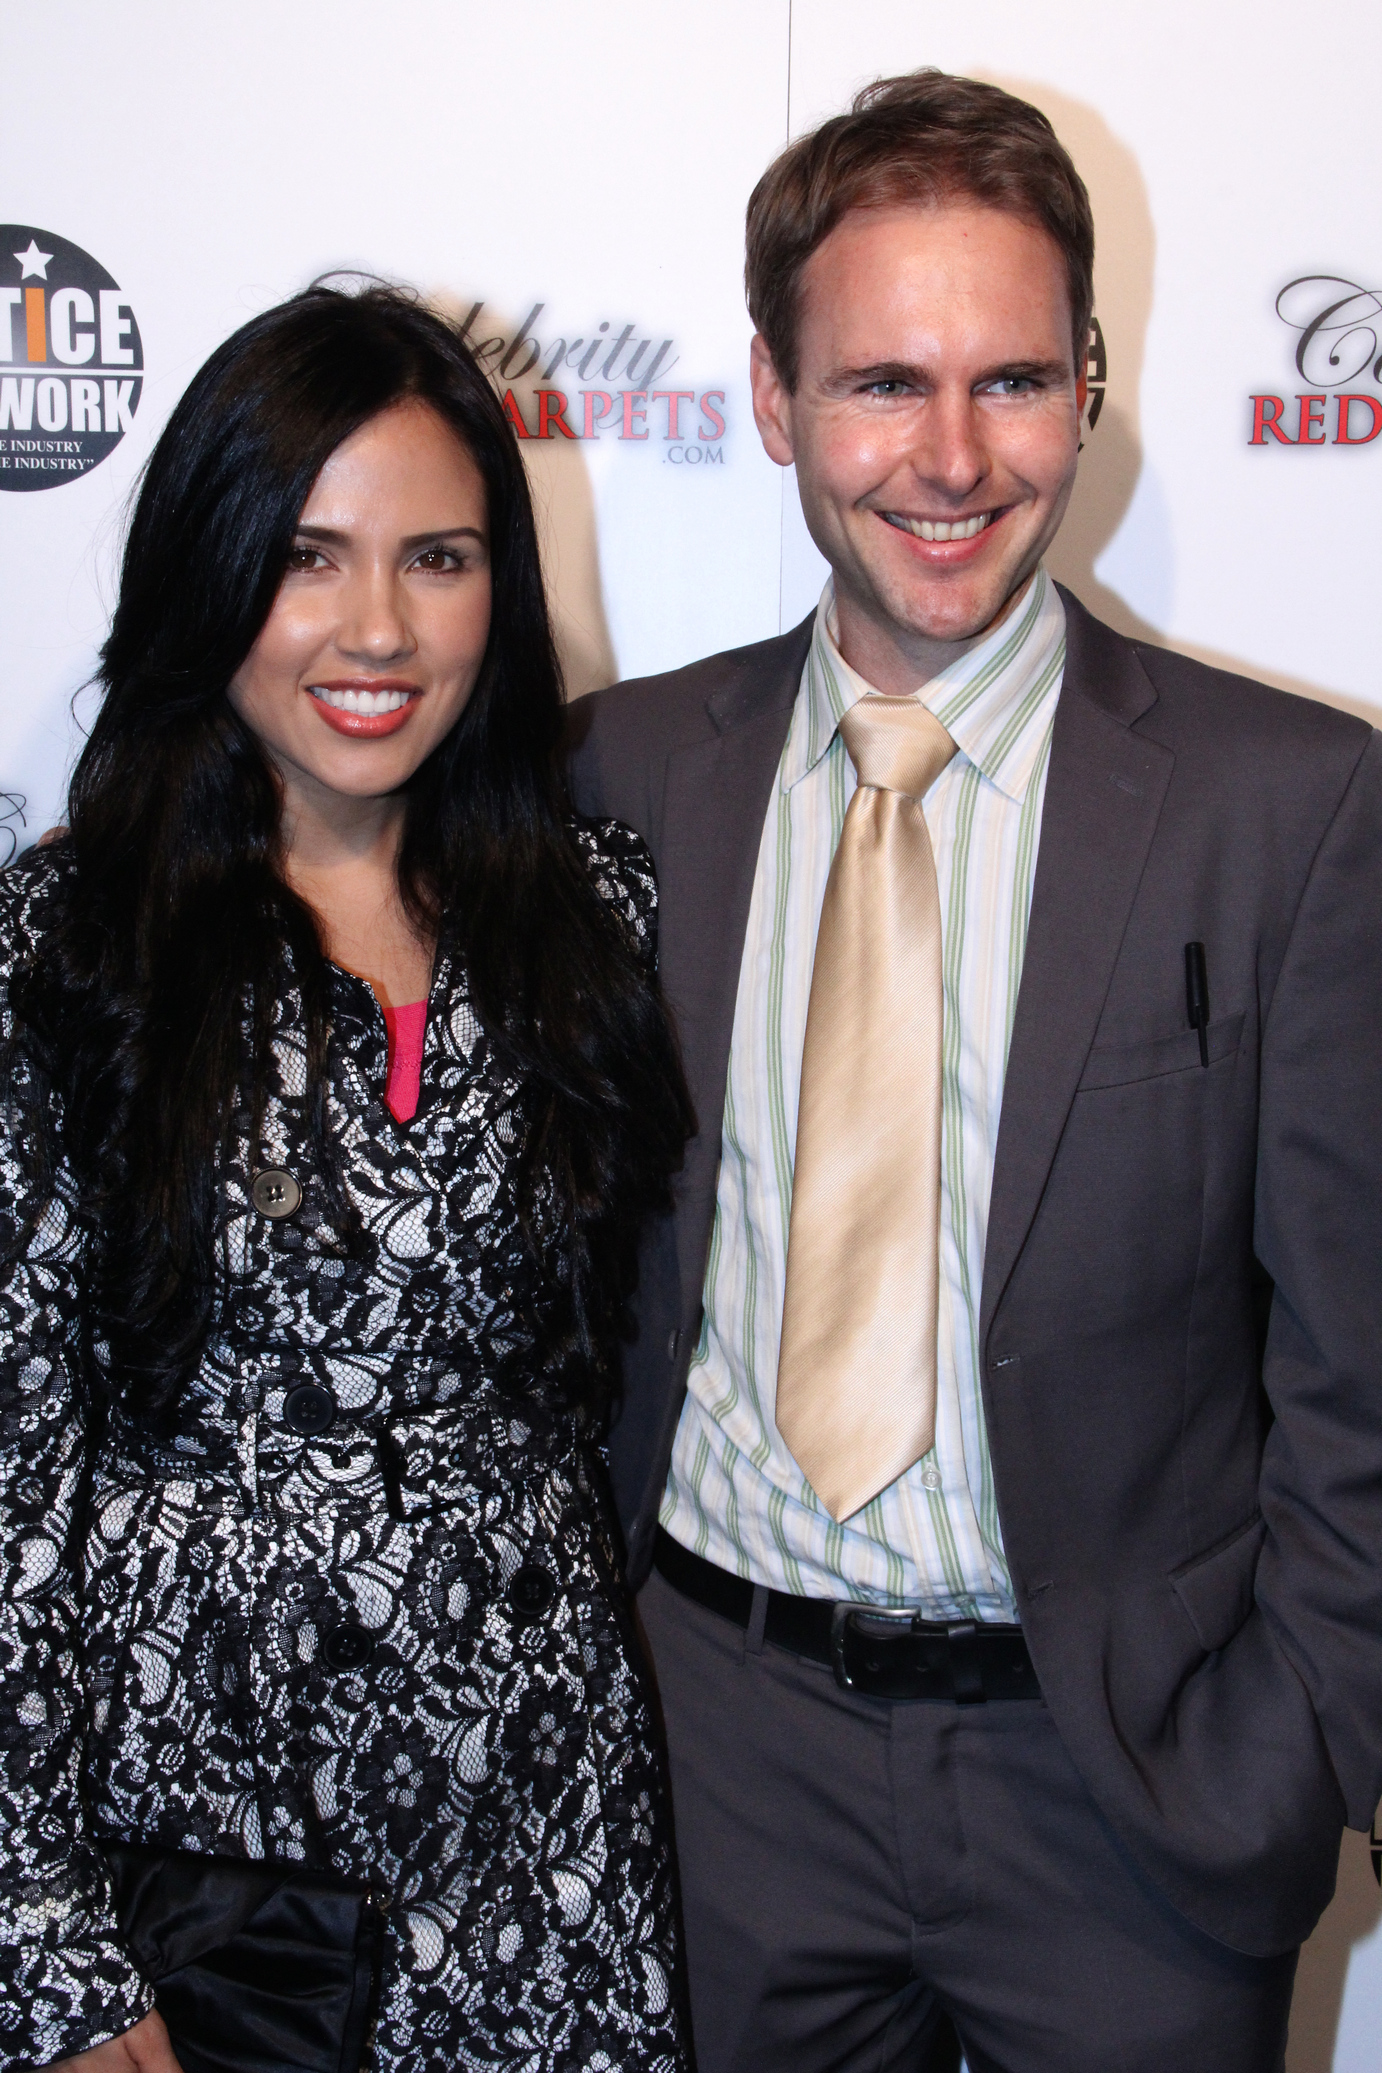 Red Carpet Event - Green Night out Charity Mixer. Ashley Jeffery.